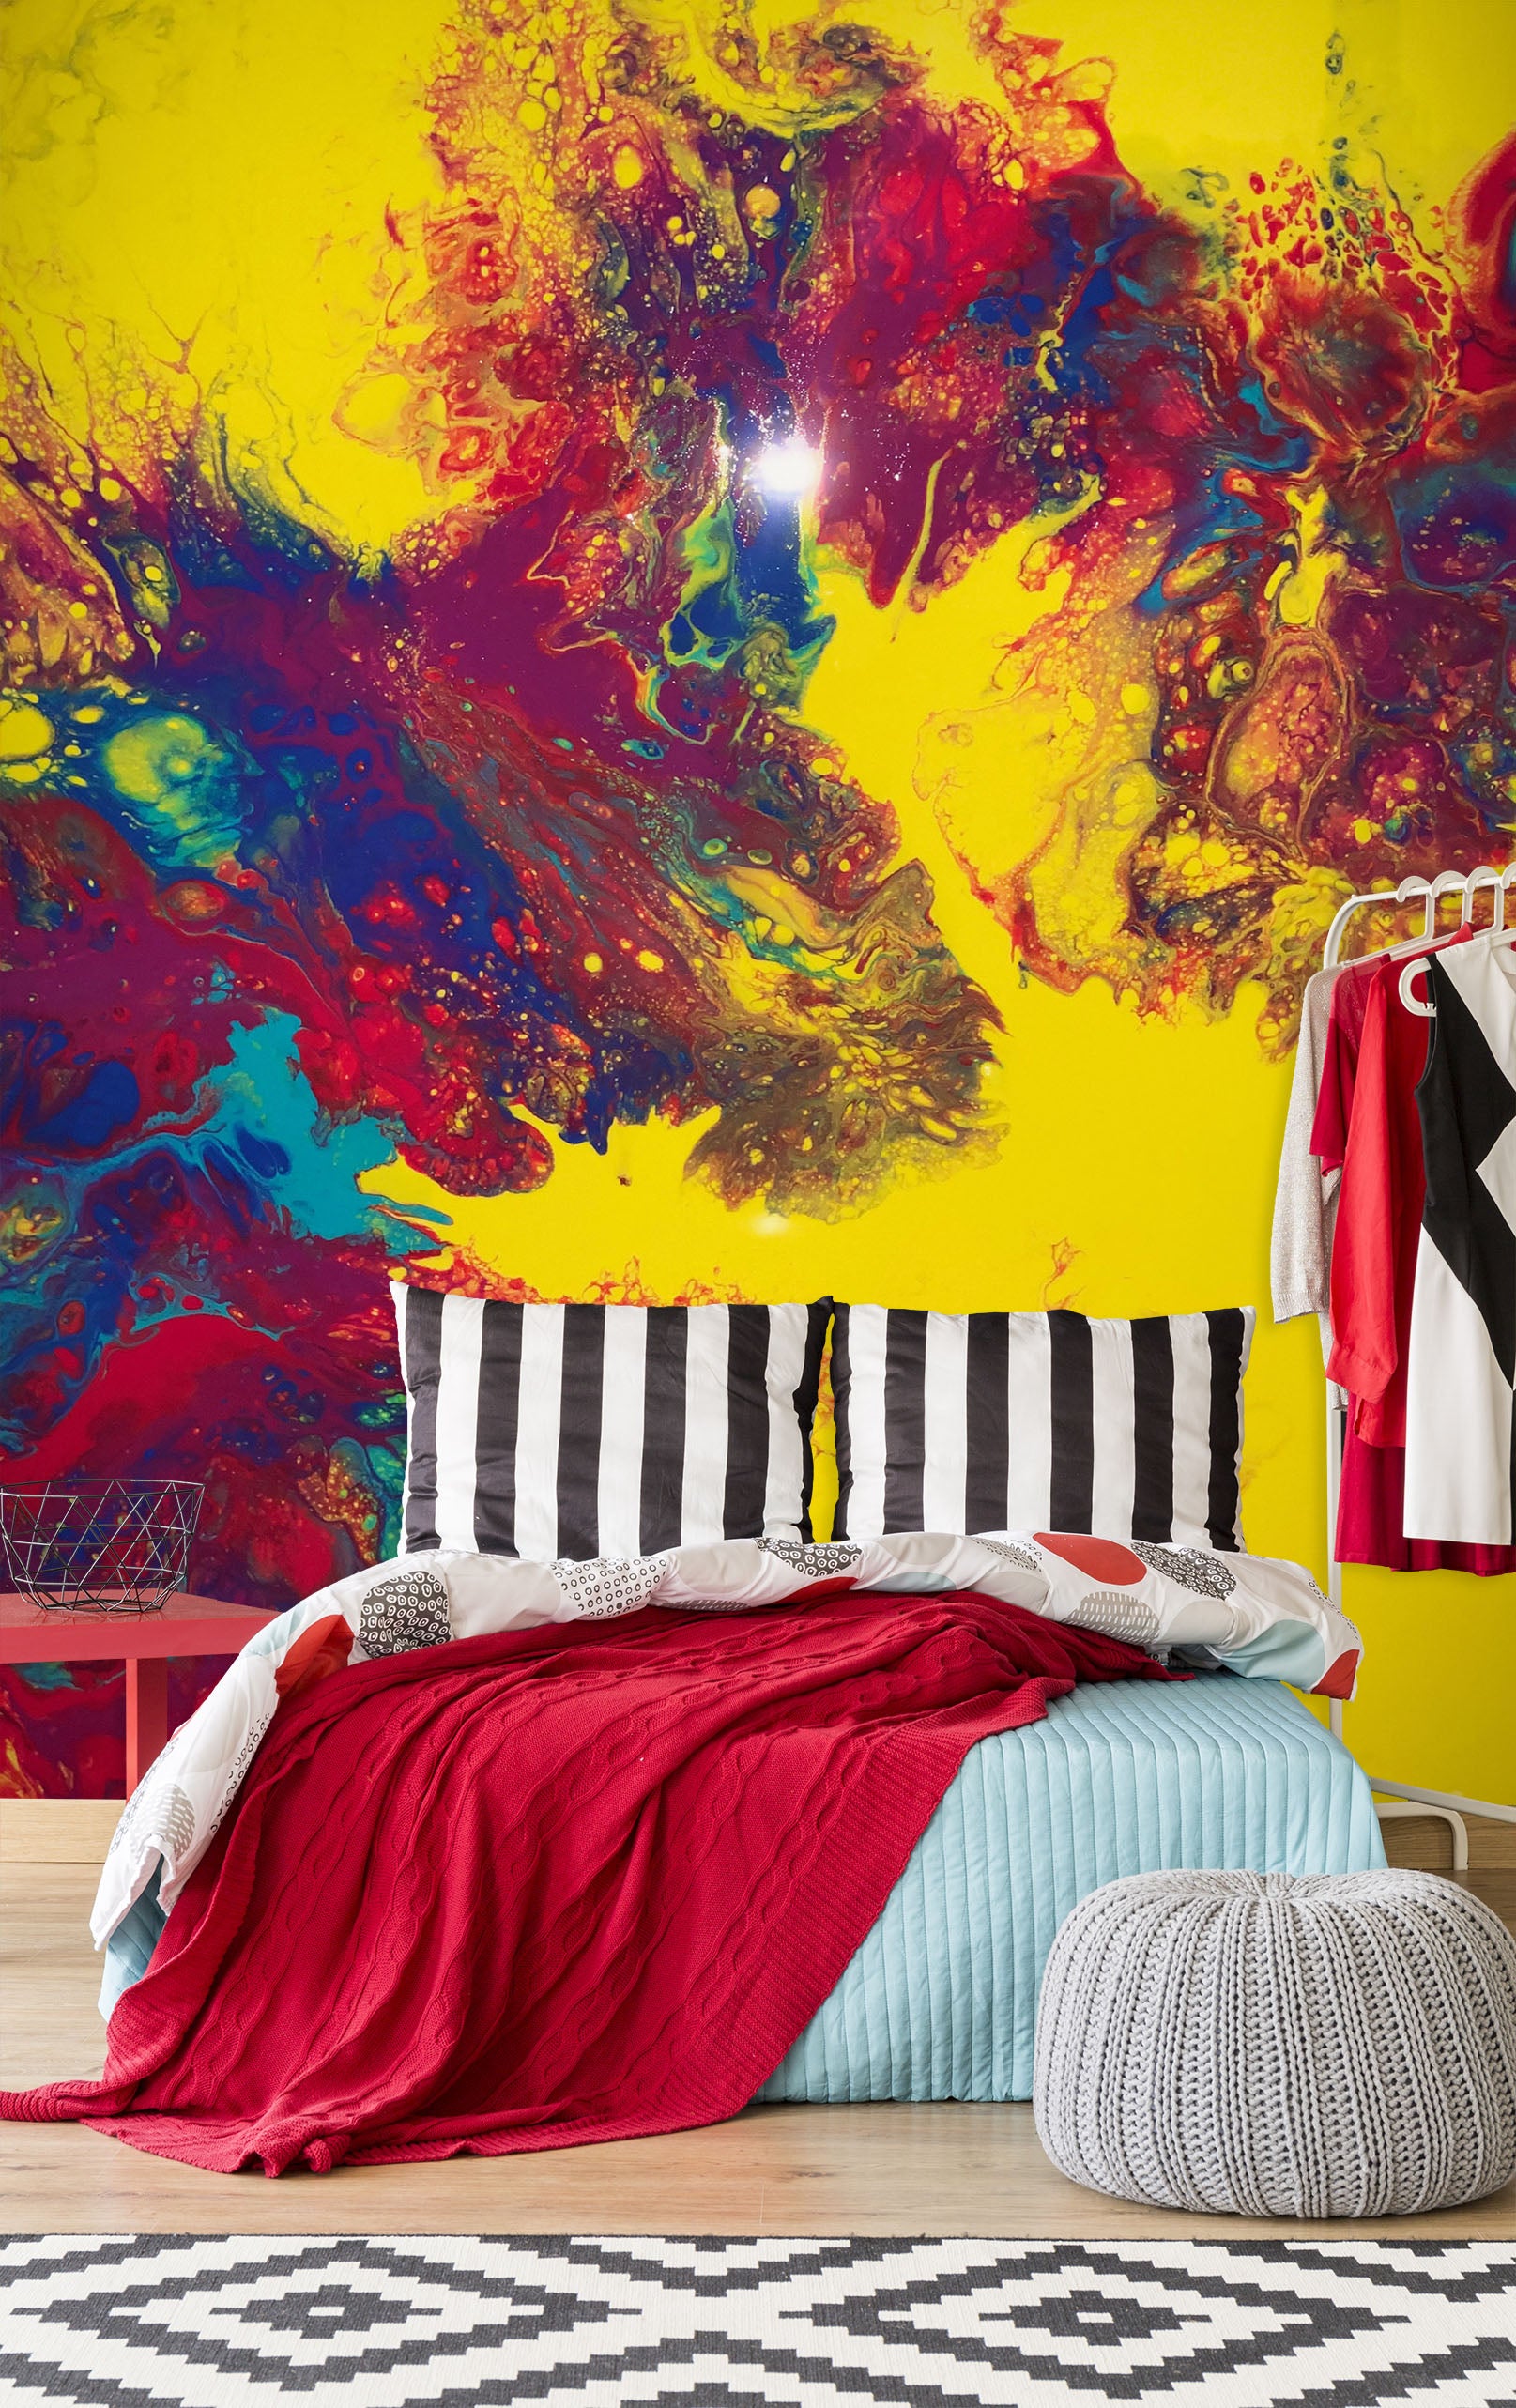 3D Colorful Pattern 40044 Valerie Latrice Wall Mural Wall Murals